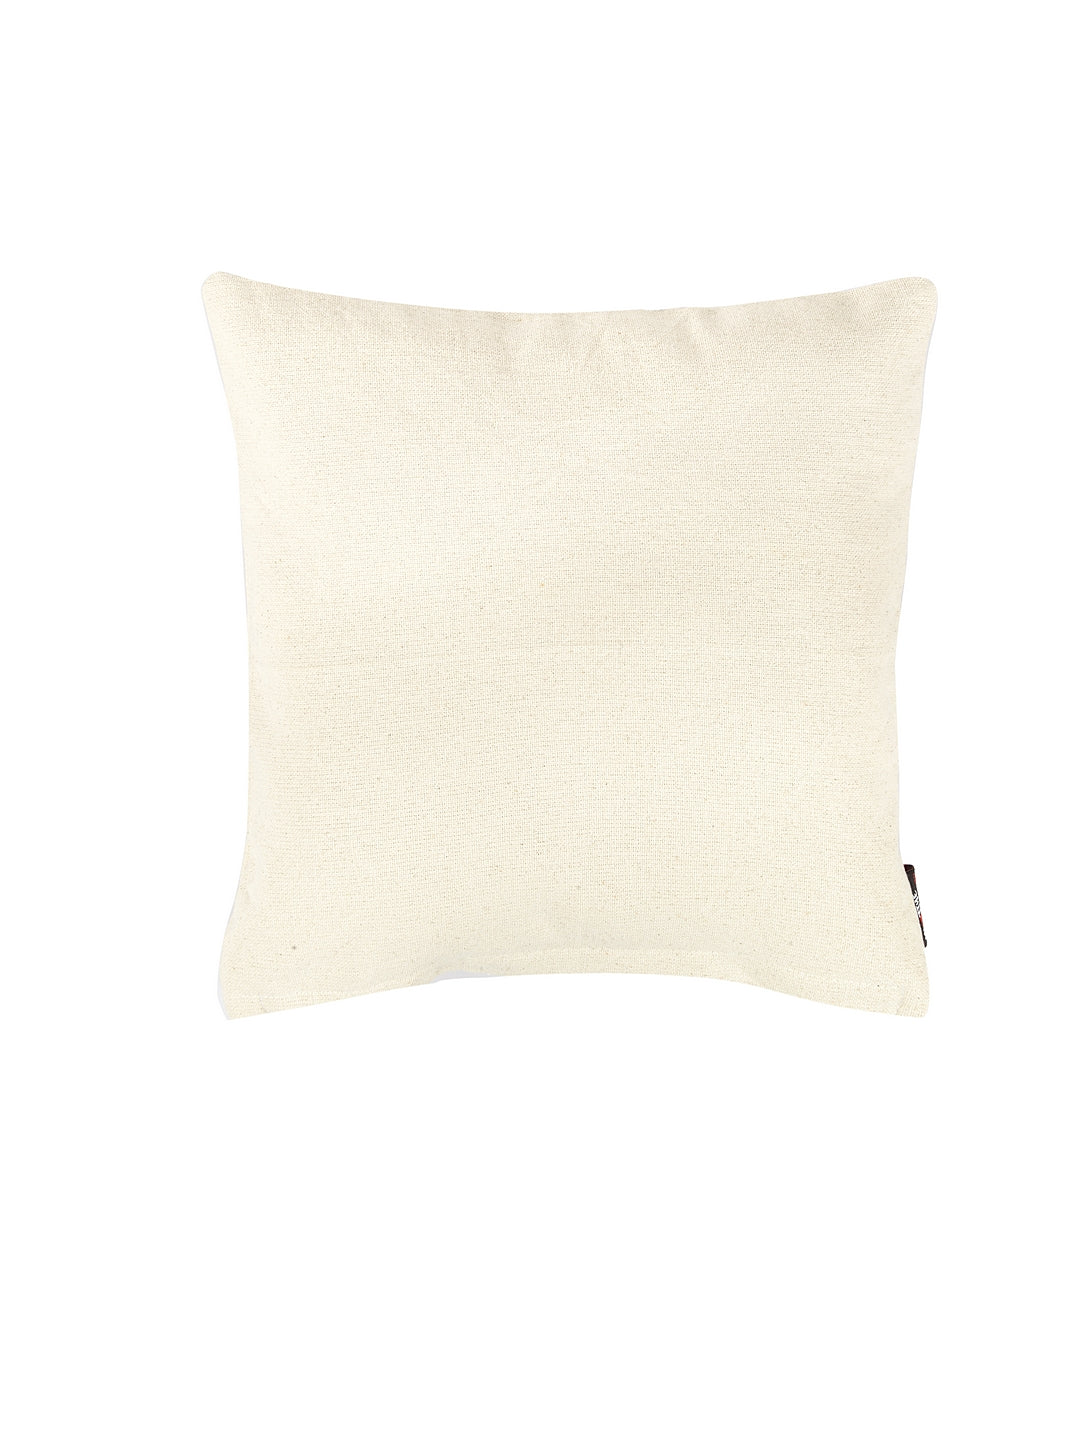 KLOTTHE Set of Five OffWhite Poly Cotton Cushion Covers With Microfibre Fillers (40X40 cm)